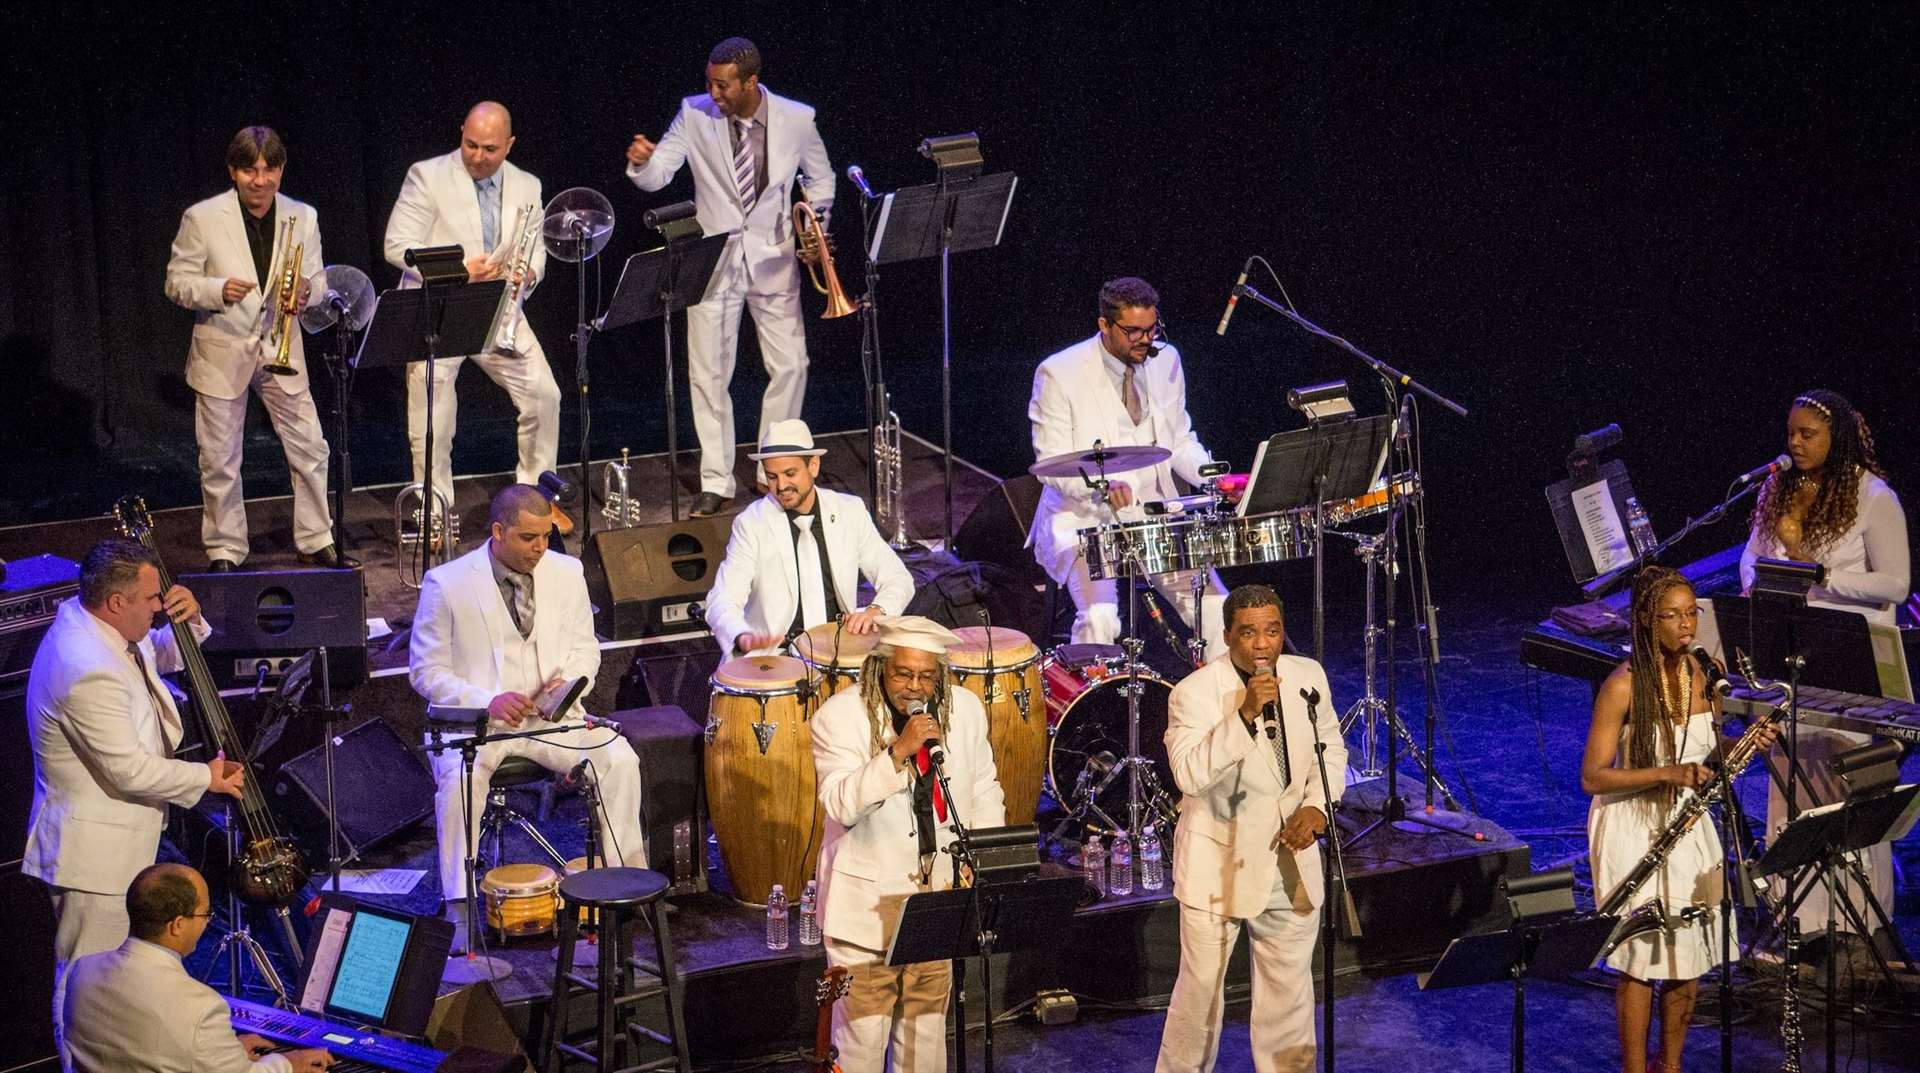 Architect of the Buena Vista Social Club Juan de Marcos brings the sound of Havana to East Kent with the Afro-Cuban All Stars. (16173276)